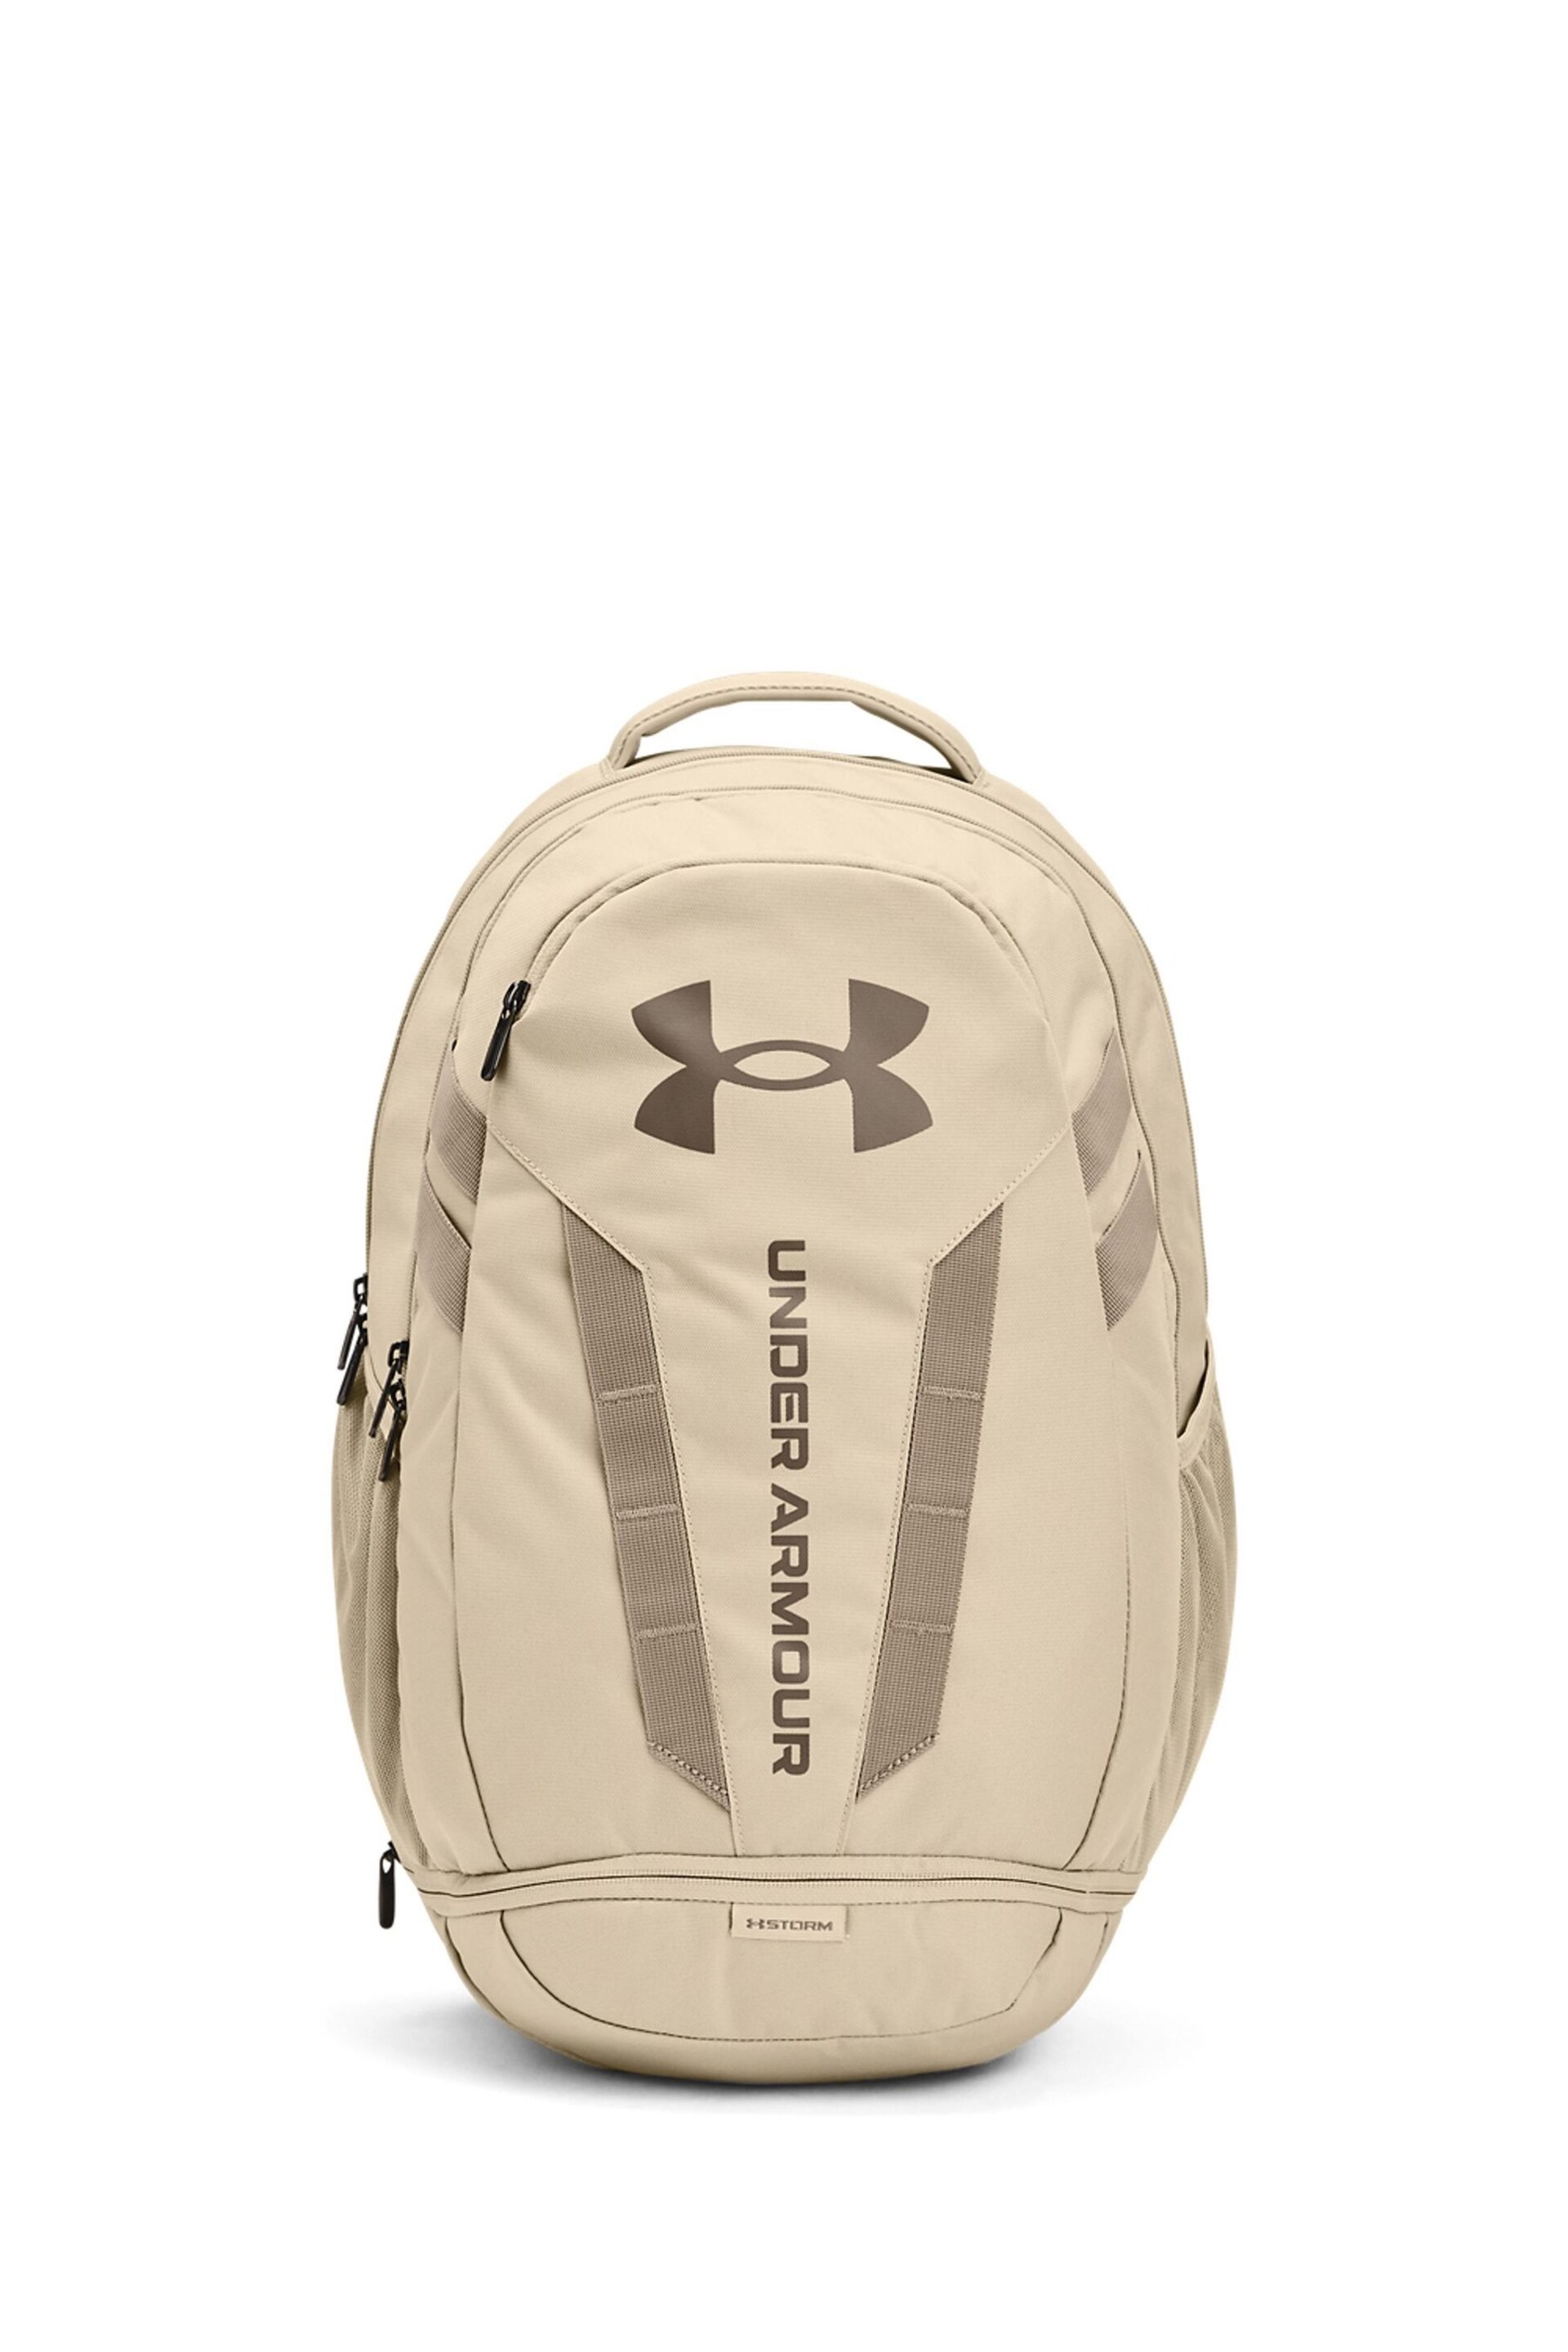 Under Armour Green Hustle 5 Backpack - Image 1 of 5